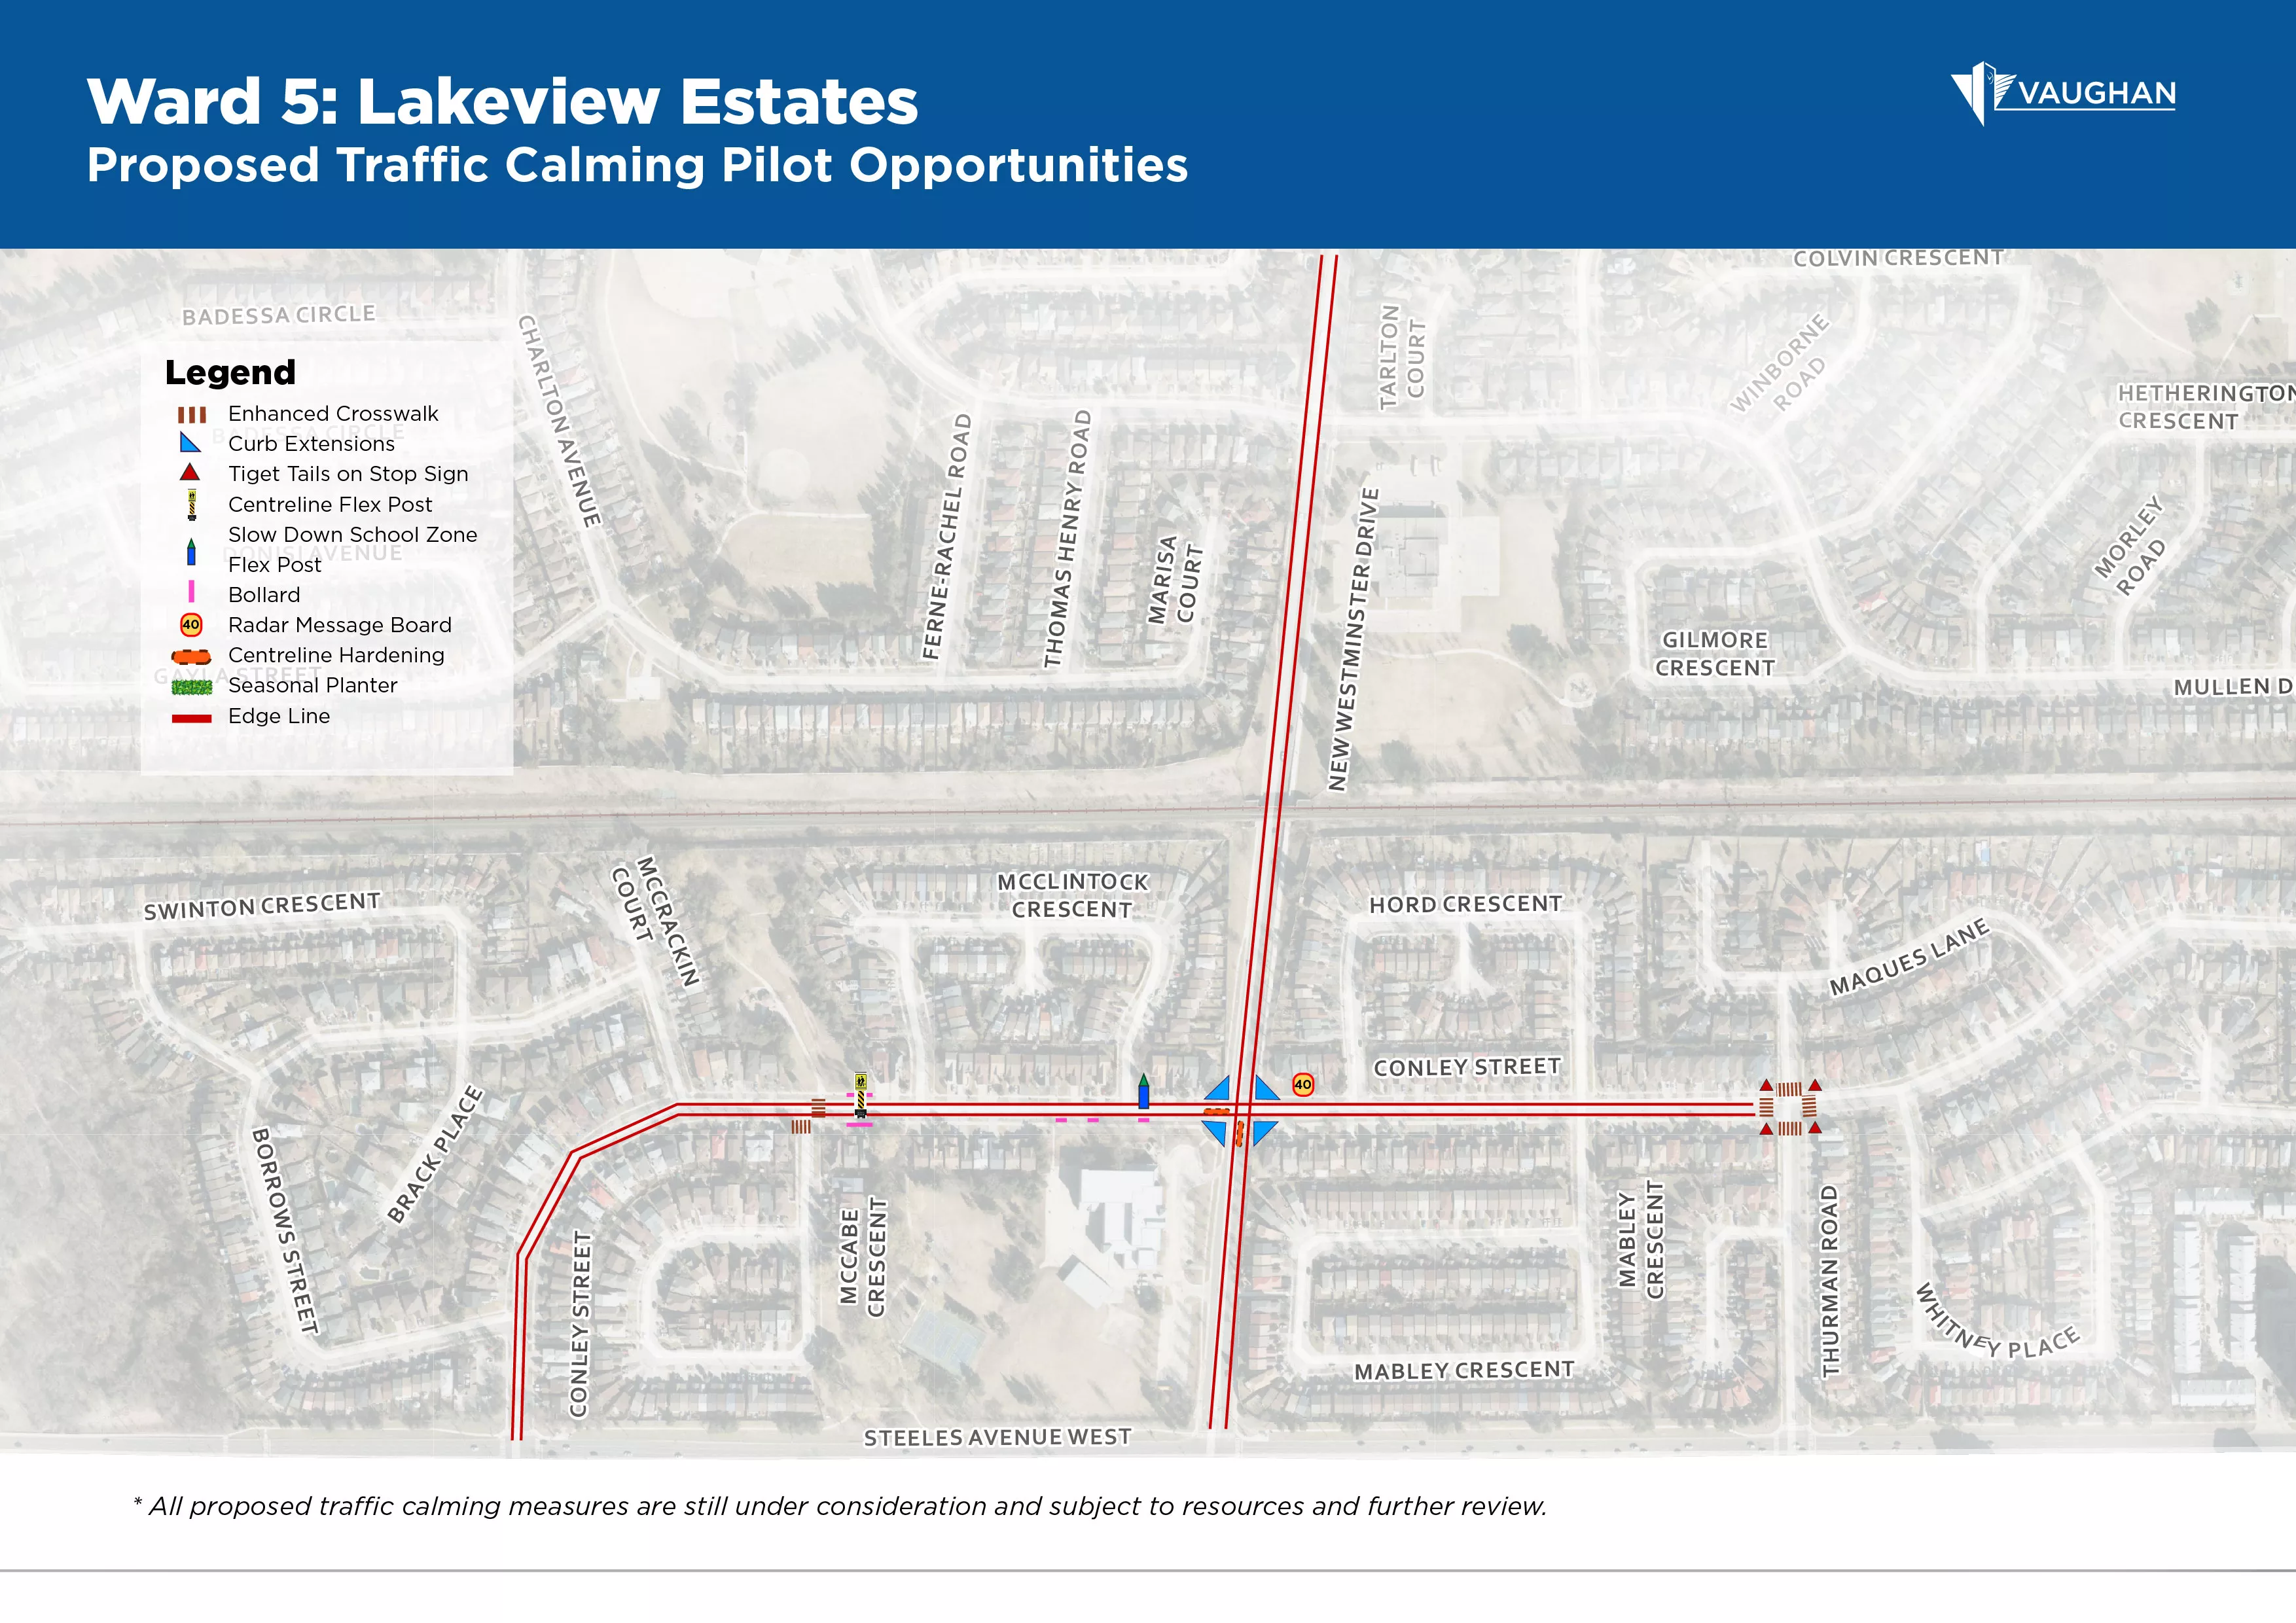 Map of Lakeview Estates with traffic calming measures